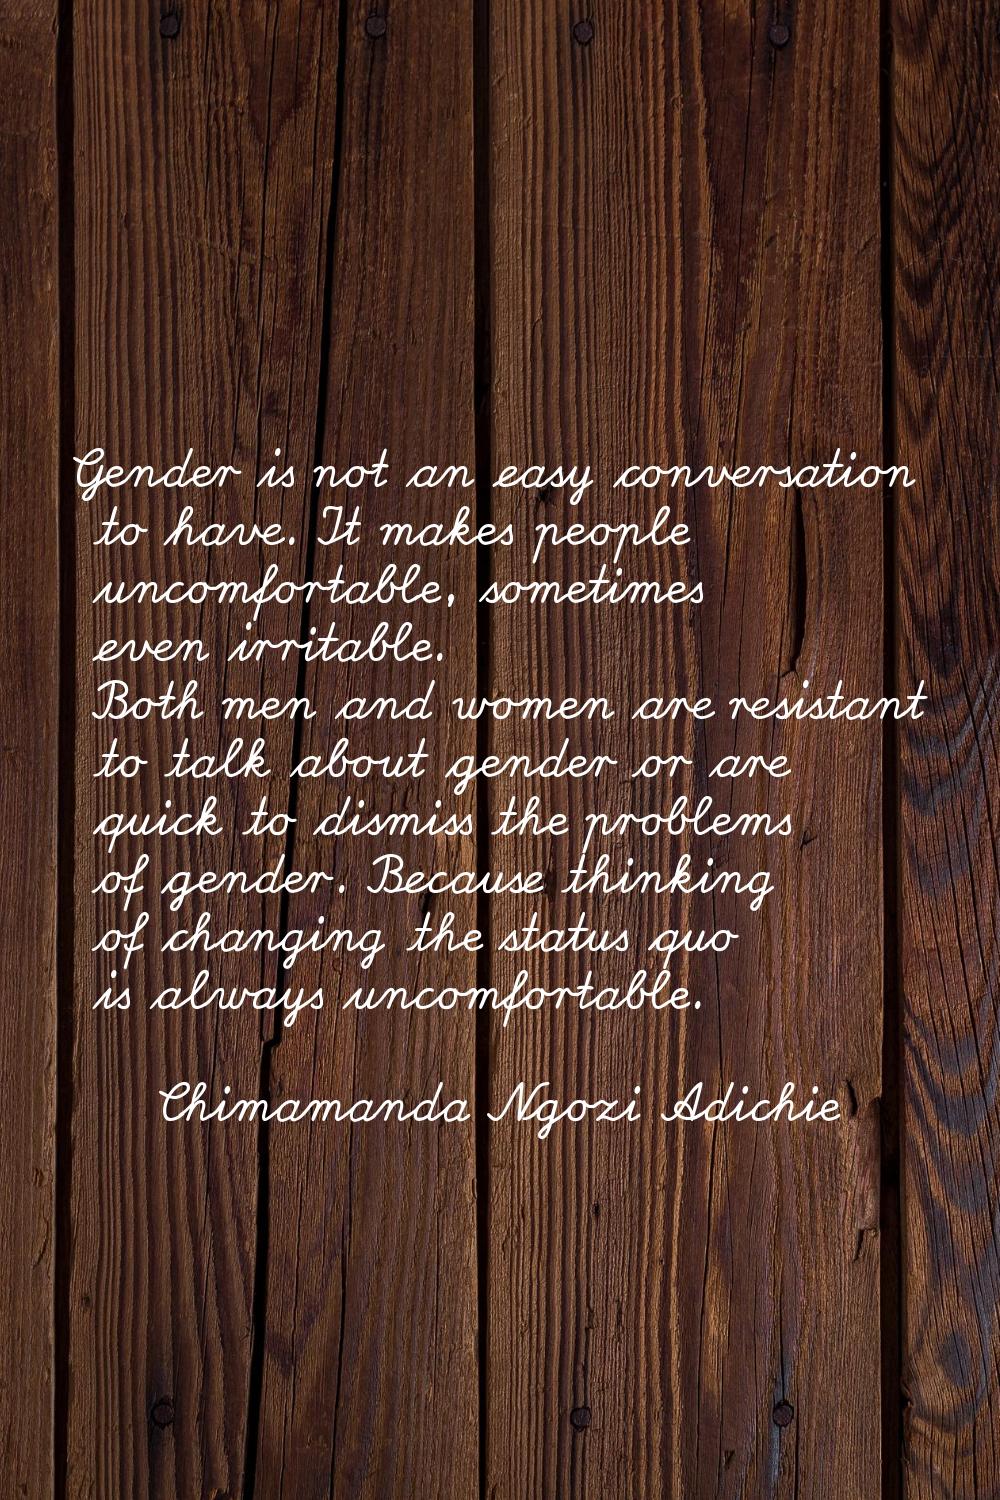 Gender is not an easy conversation to have. It makes people uncomfortable, sometimes even irritable